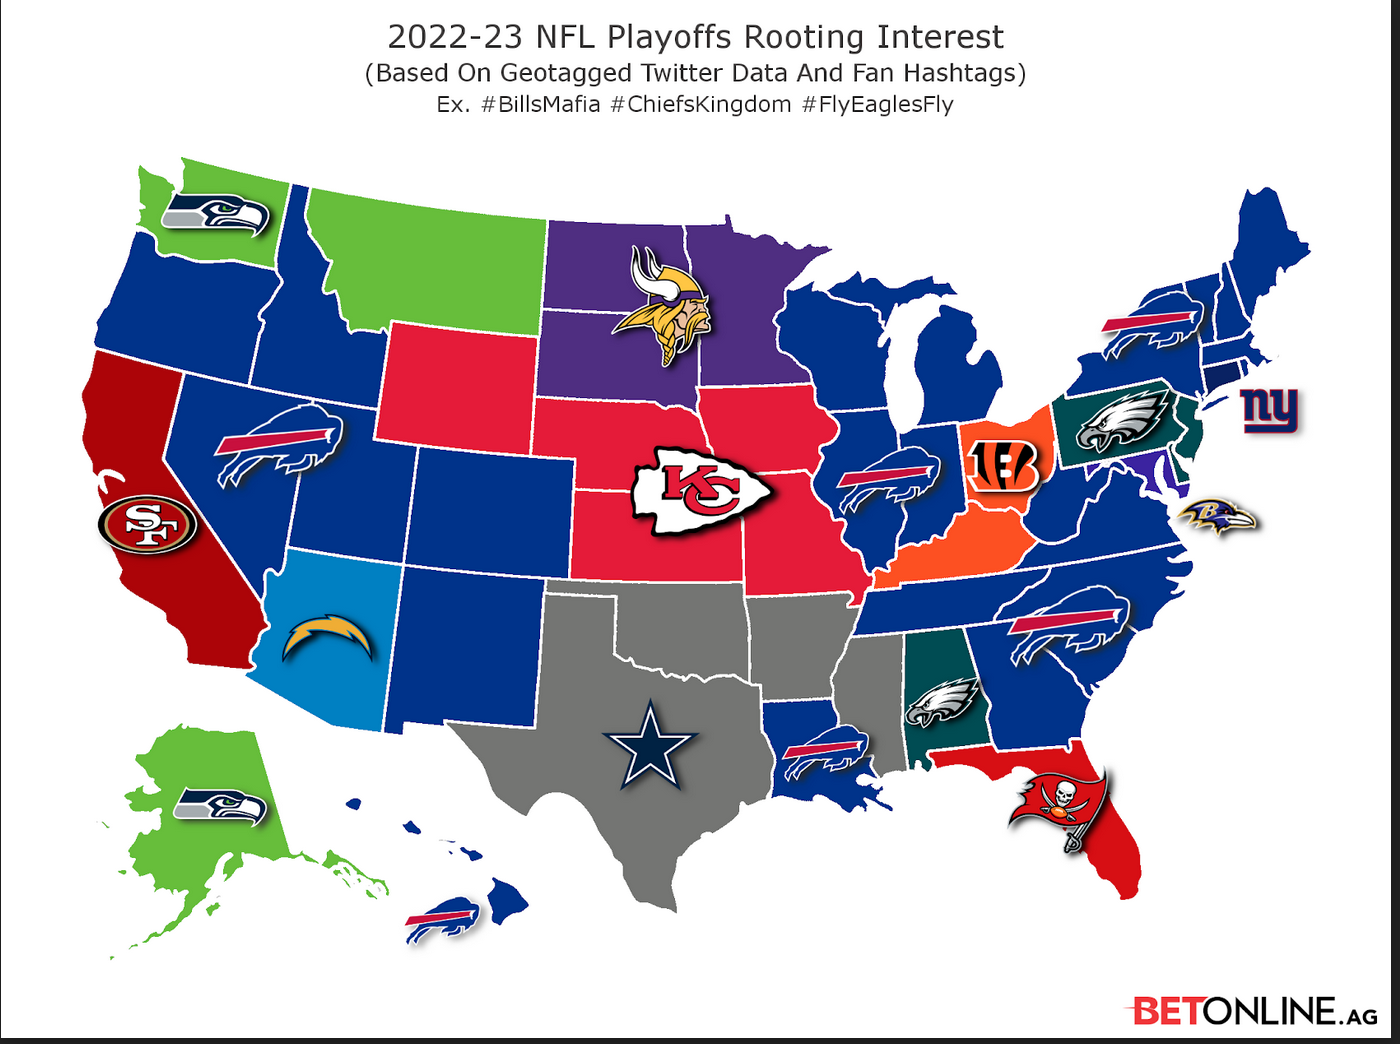 Twitter Map Shows Which Team America is Rooting for in NFL Playoffs